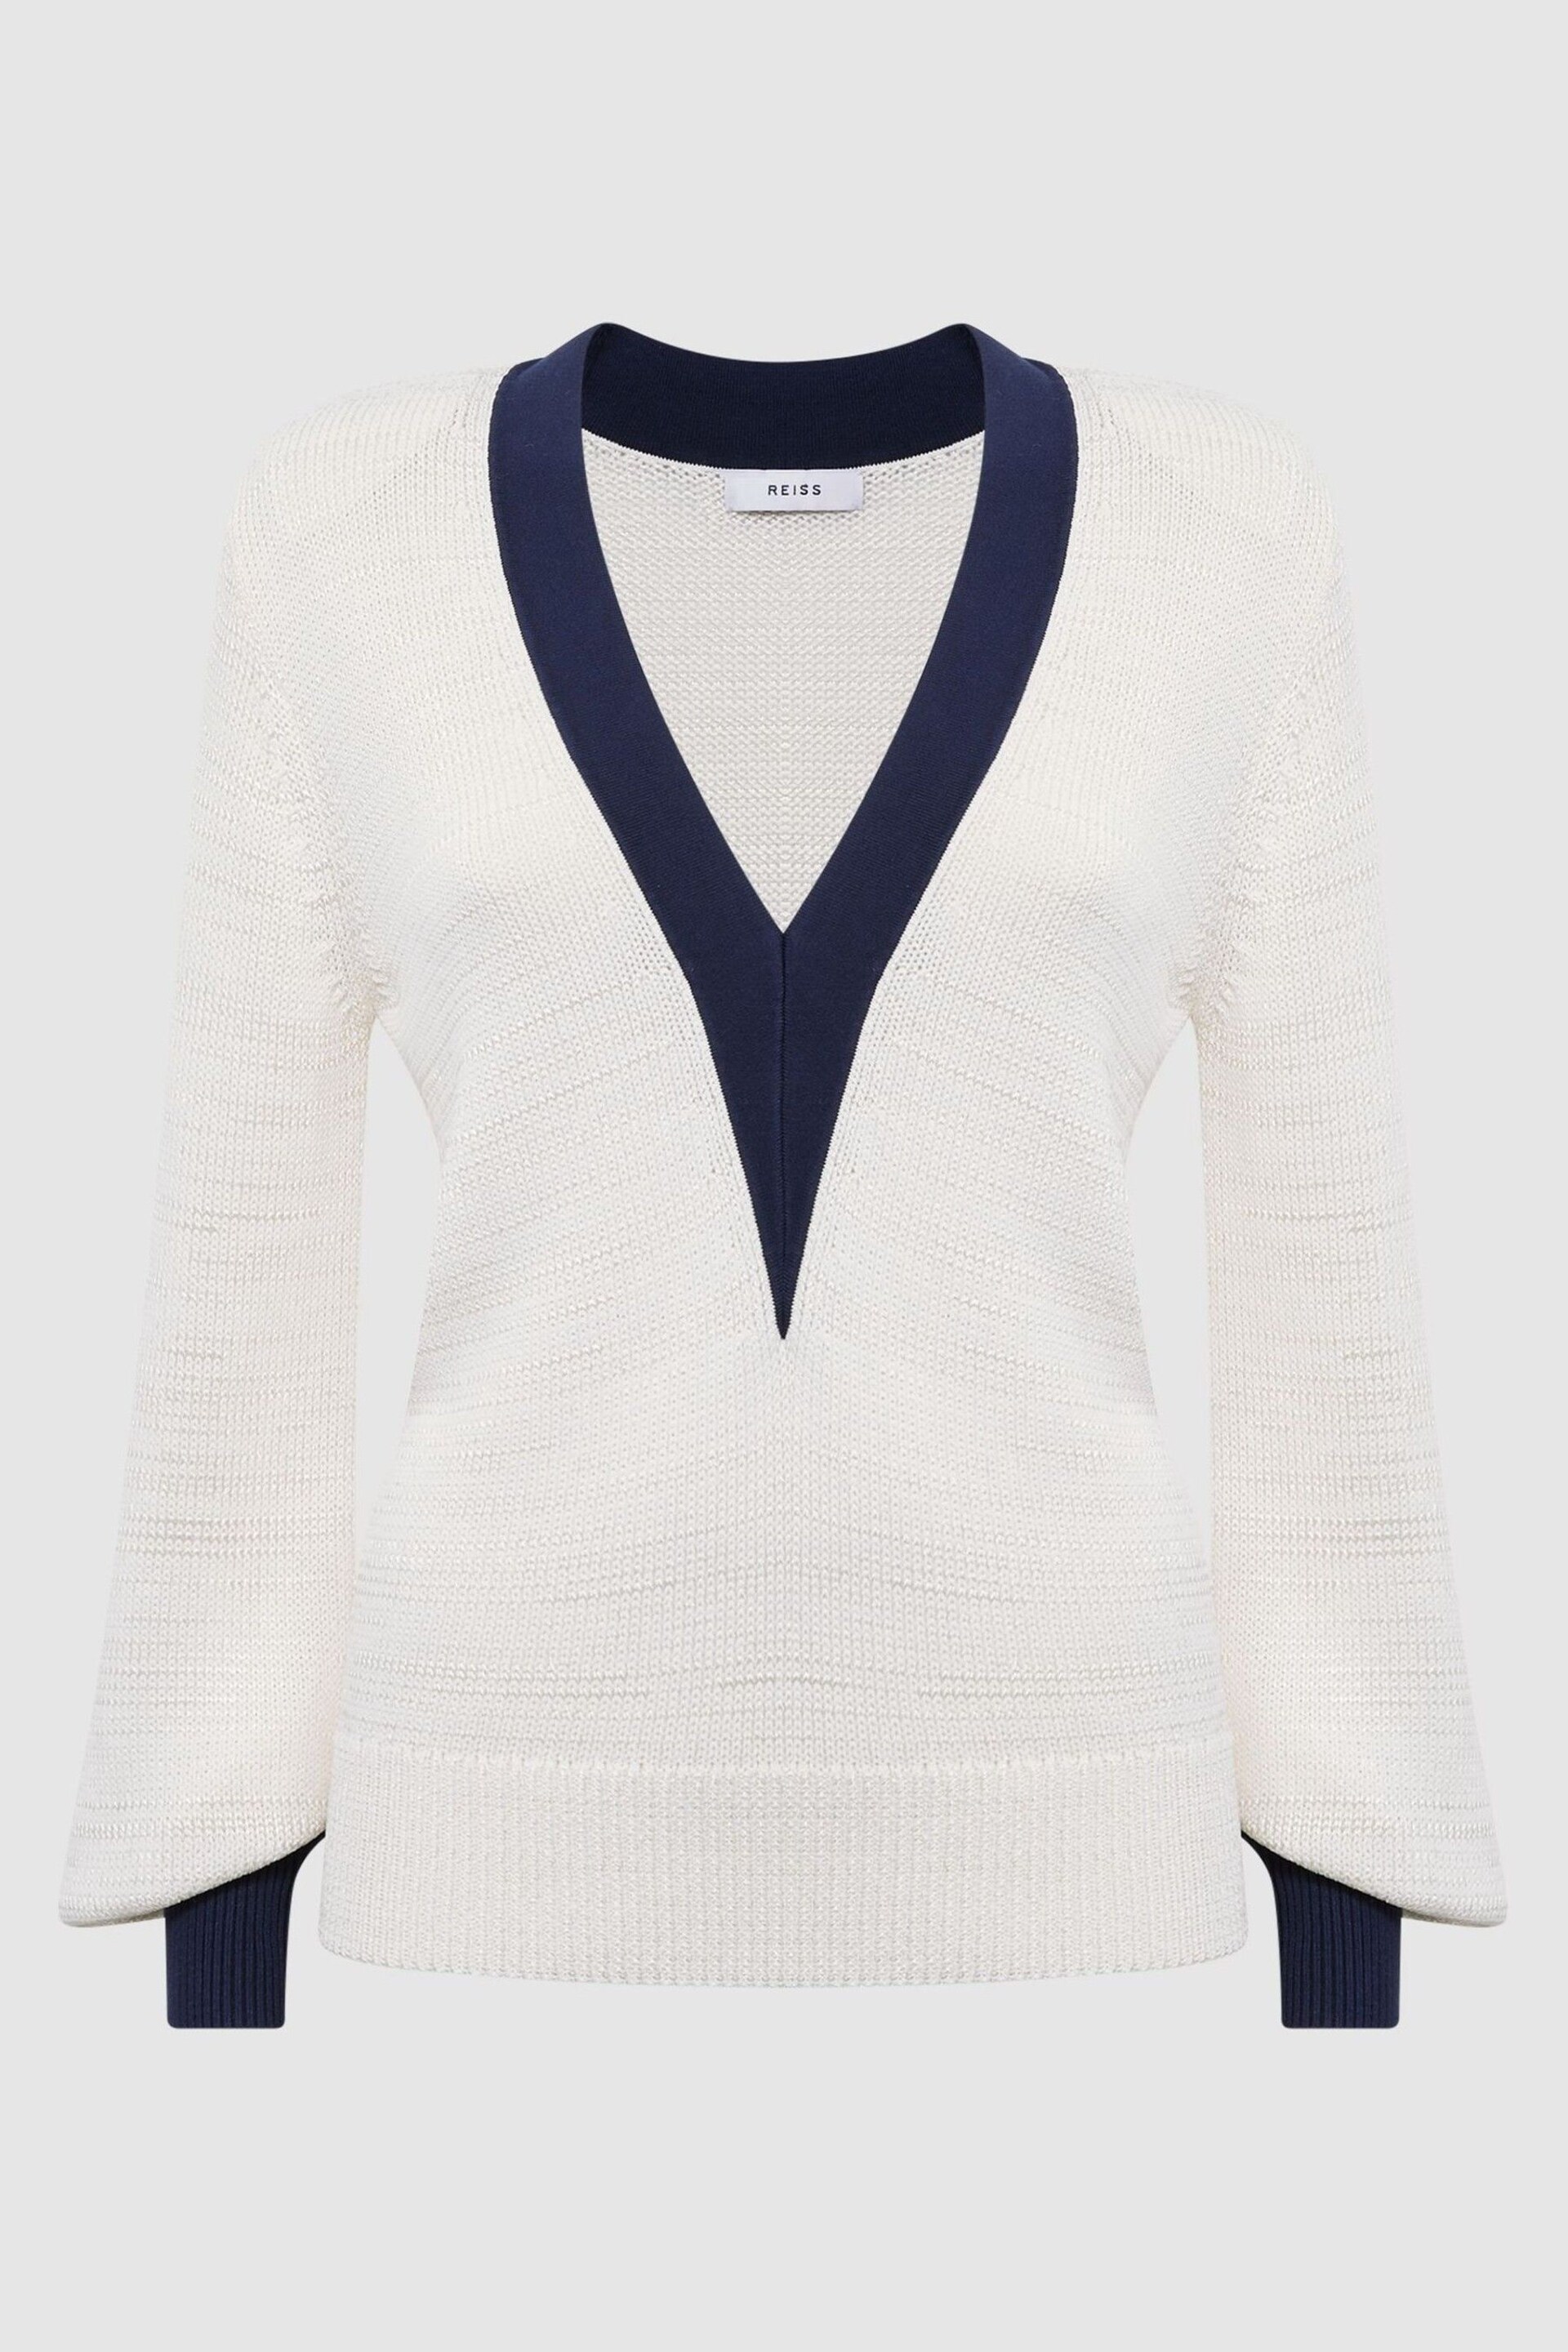 Reiss White/Navy Talitha Contrast Trim Knitted Jumper - Image 2 of 6